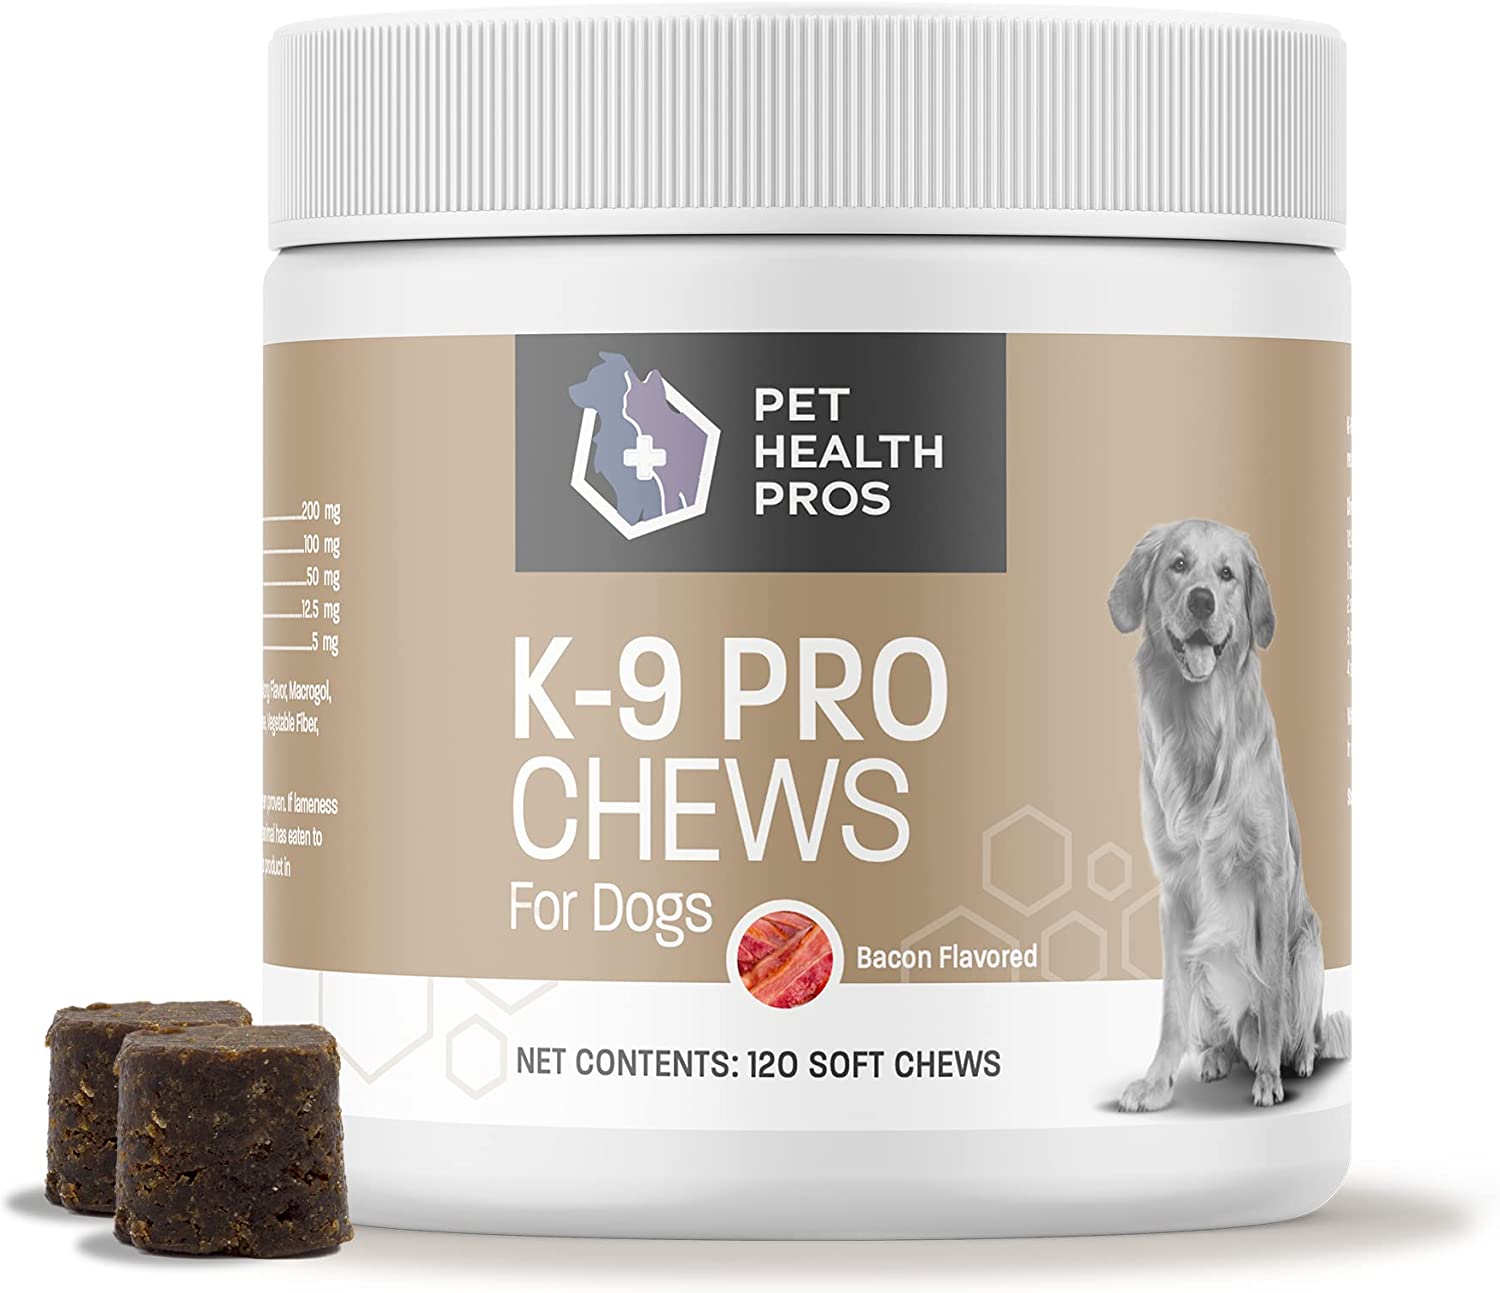 K-9 Pro Chews Joint Supplement for Dogs - Bacon Flavored